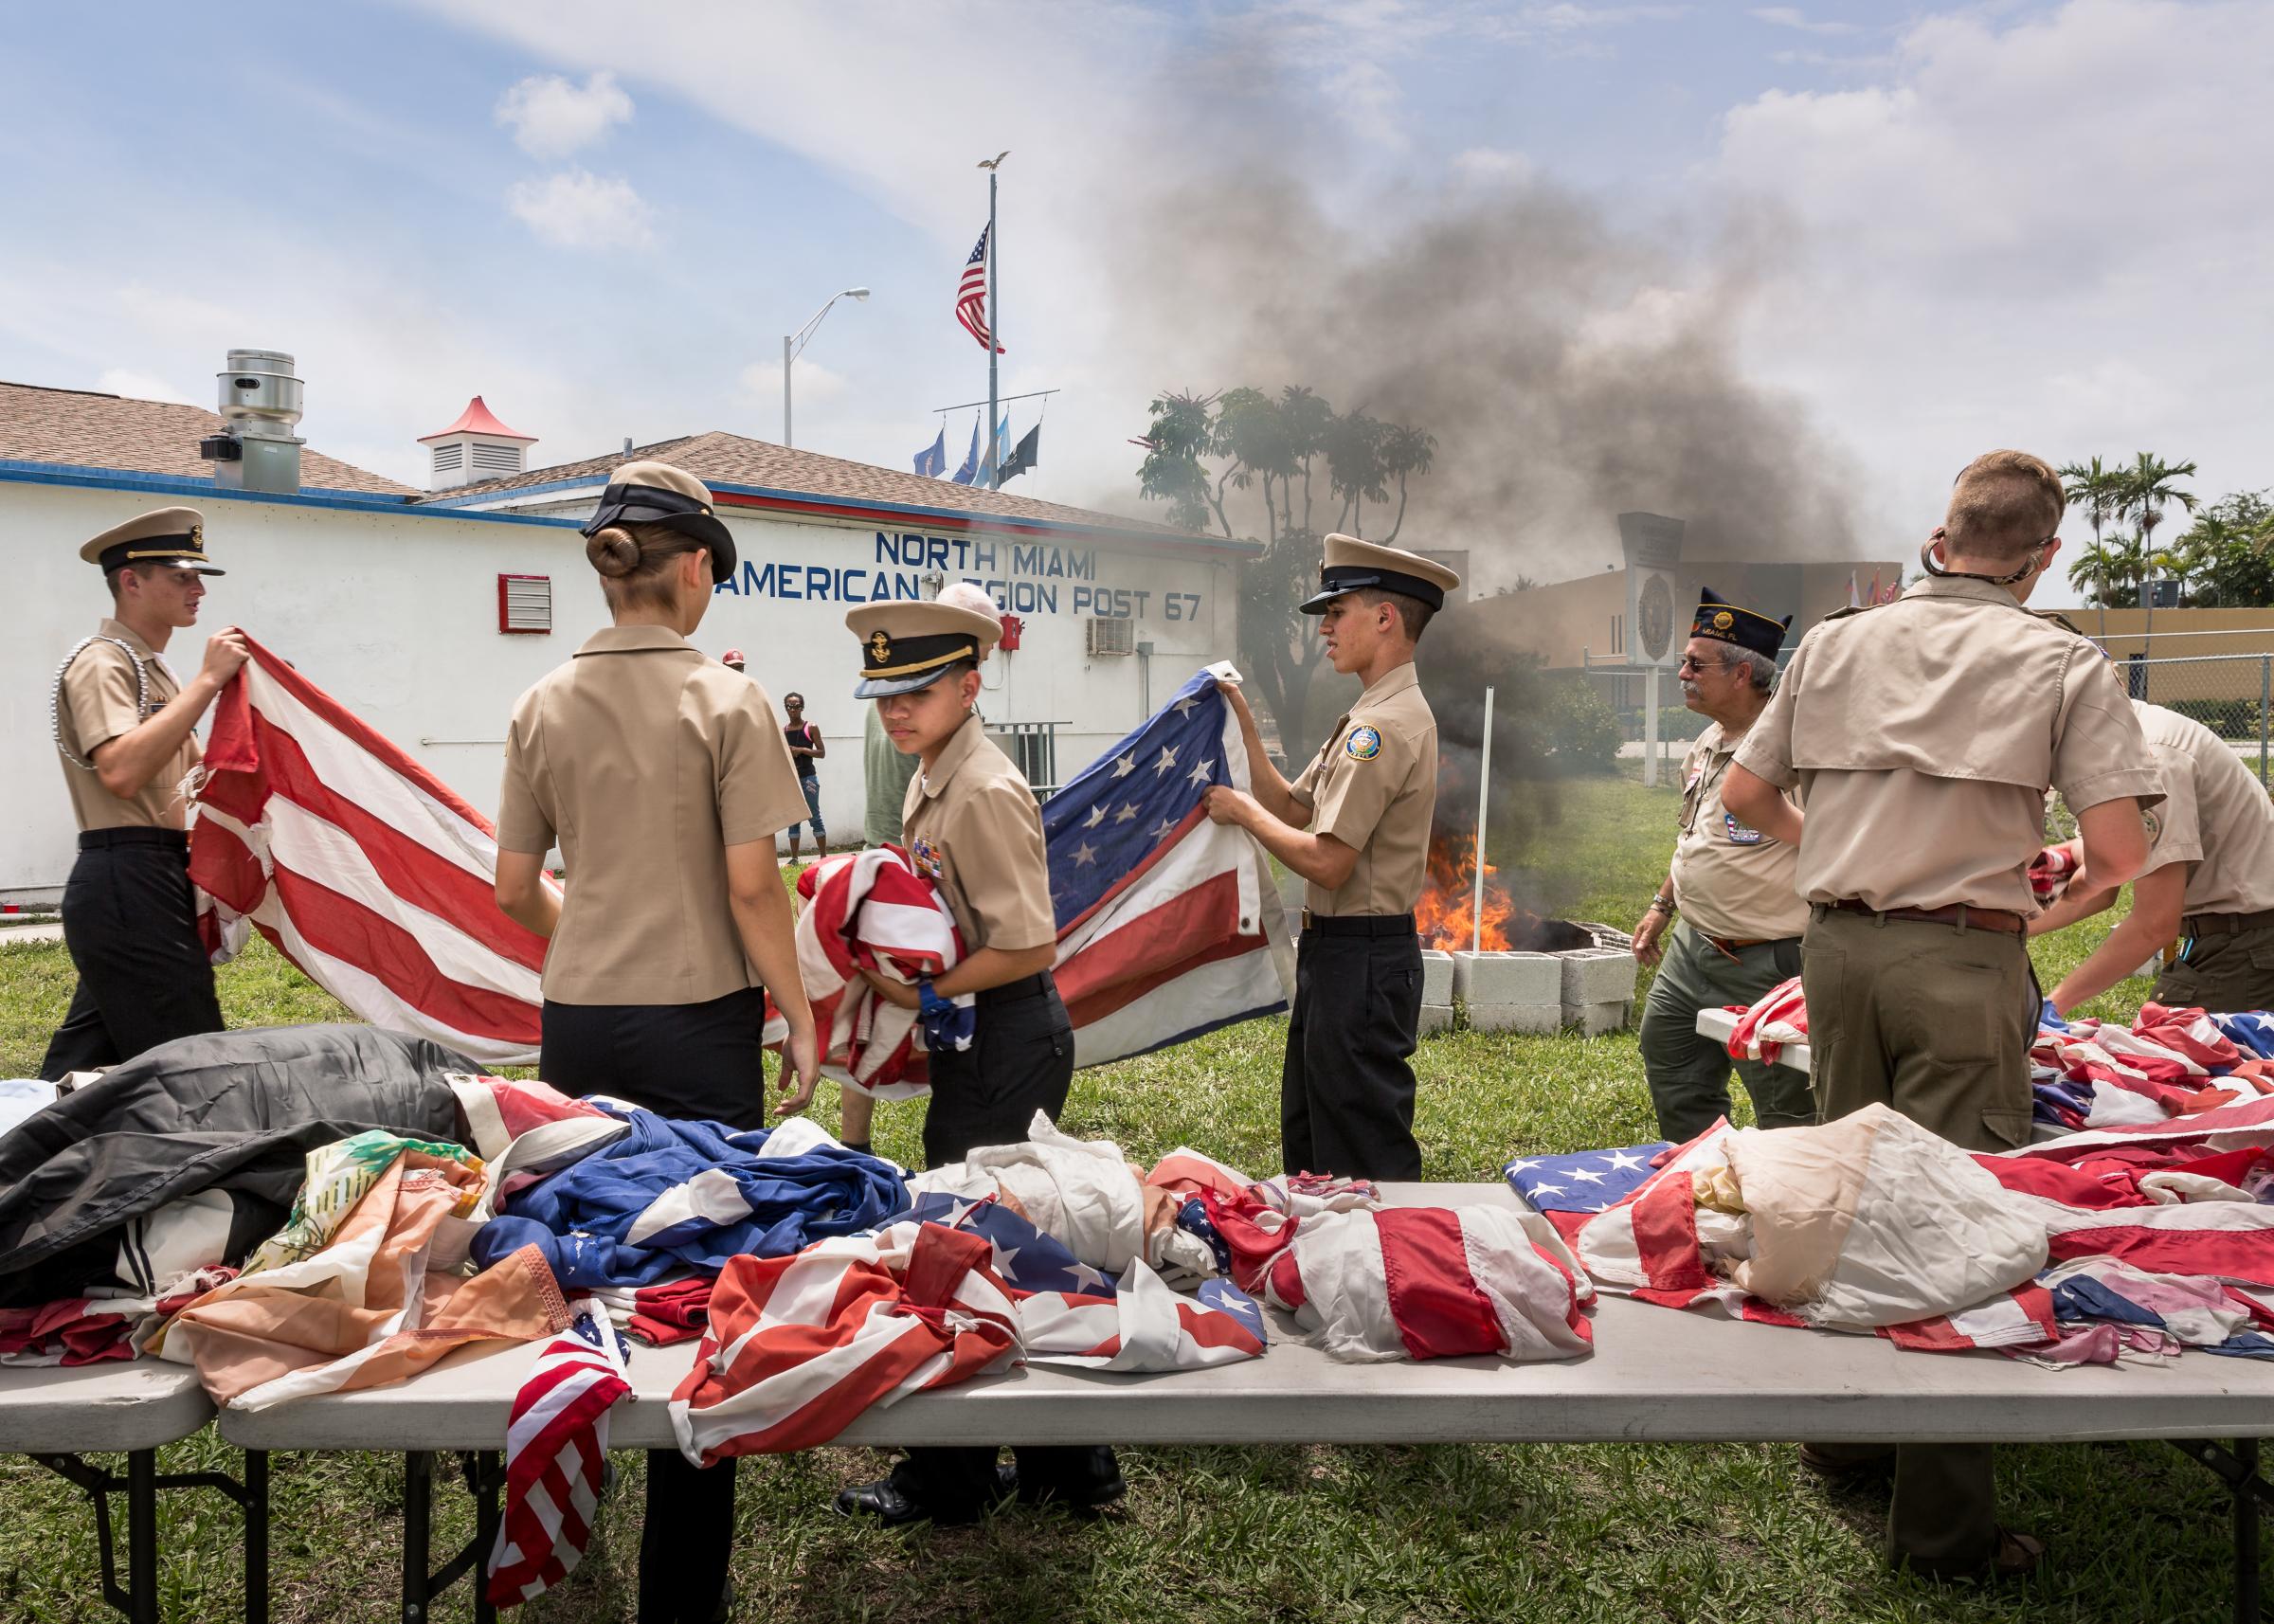 Post 67: American Legion, American Stories - Every June, Post 67 holds a Flag Retirement Ceremony to properly retire the damaged flags that...